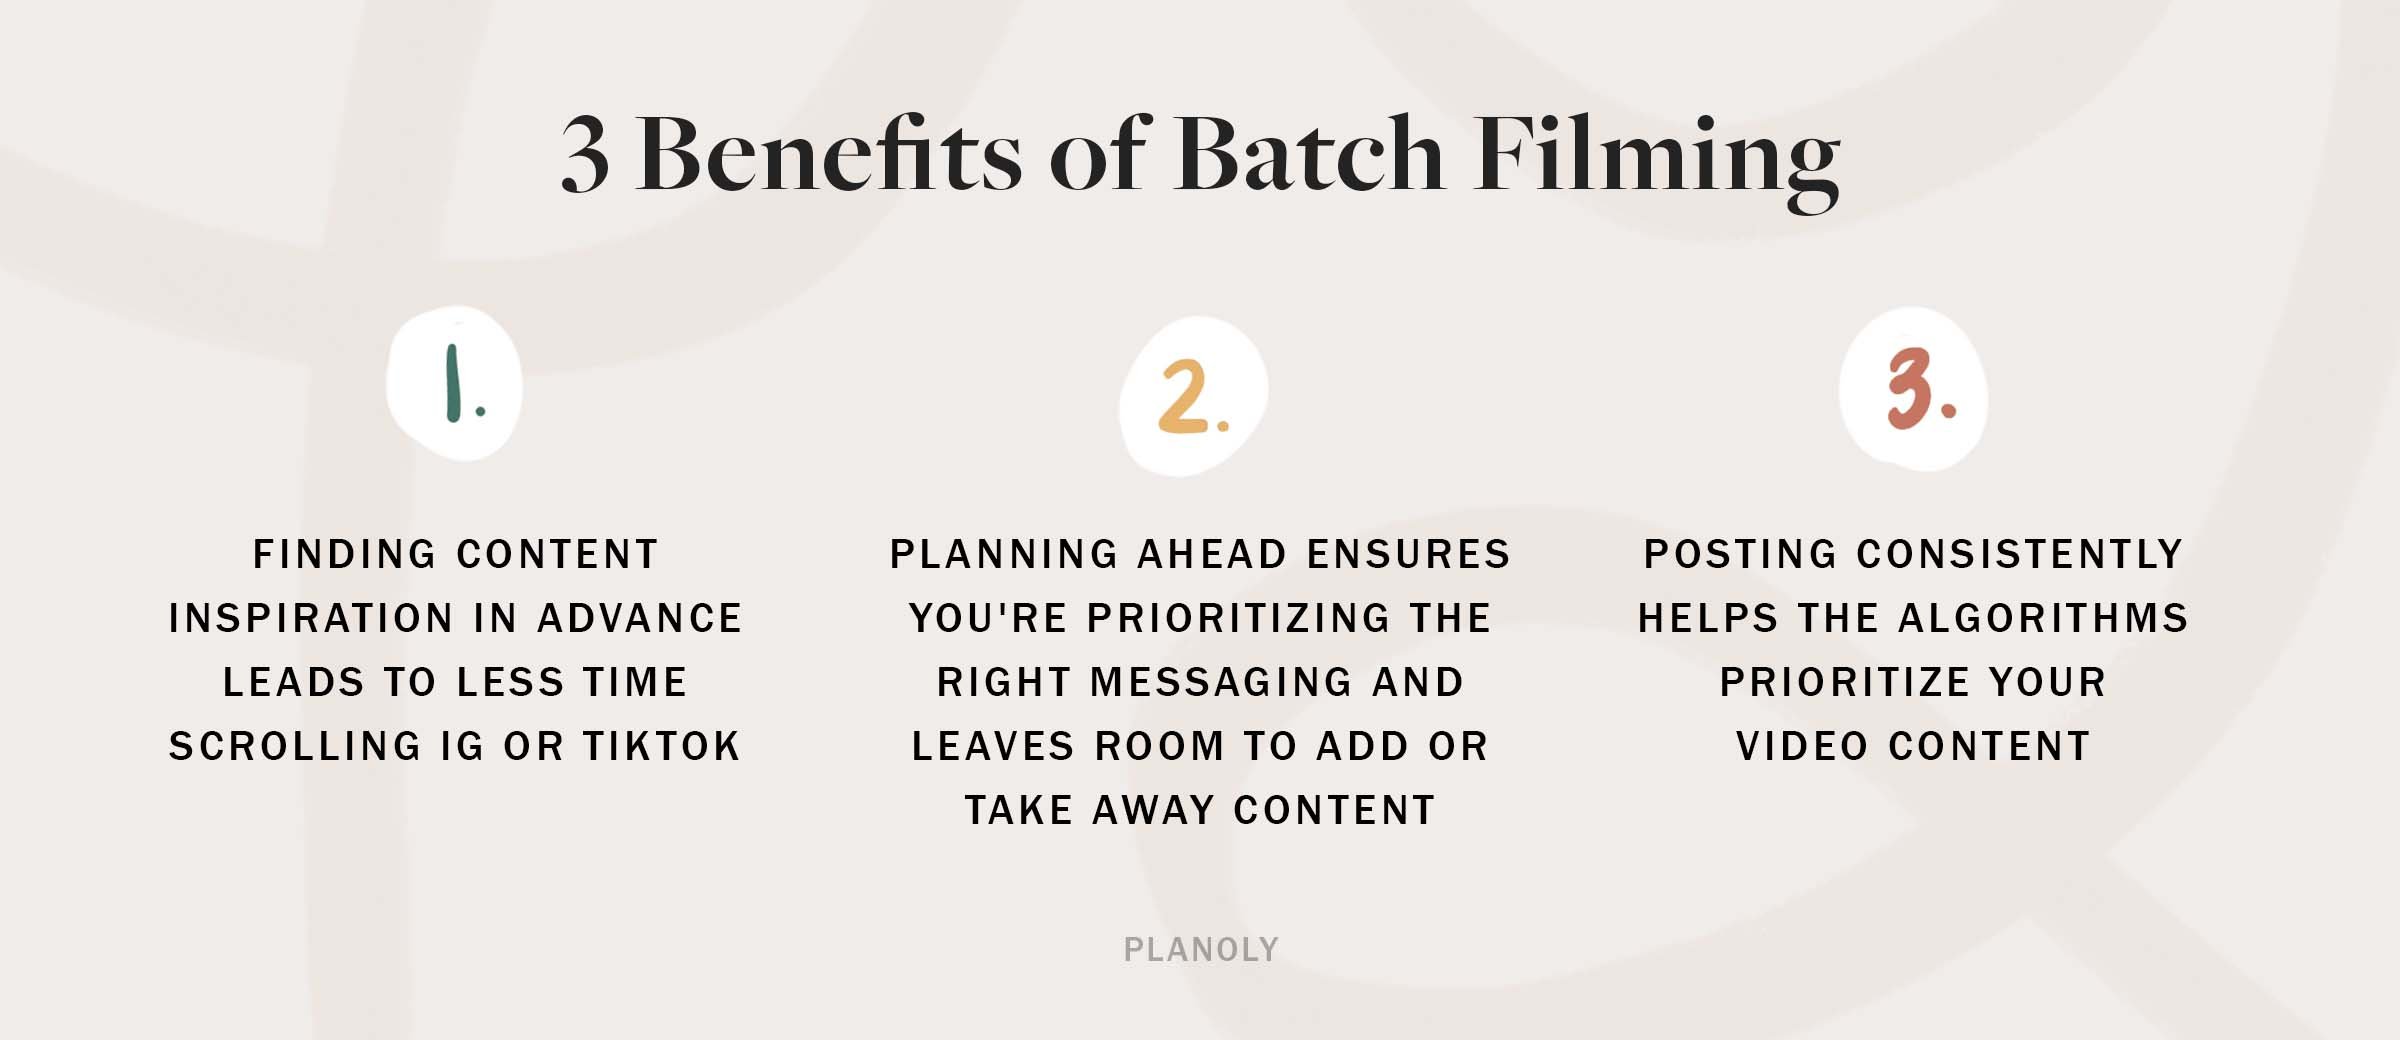 PLANOLY - Blog - 5 Tips for Batching Filming - Horizontal Image